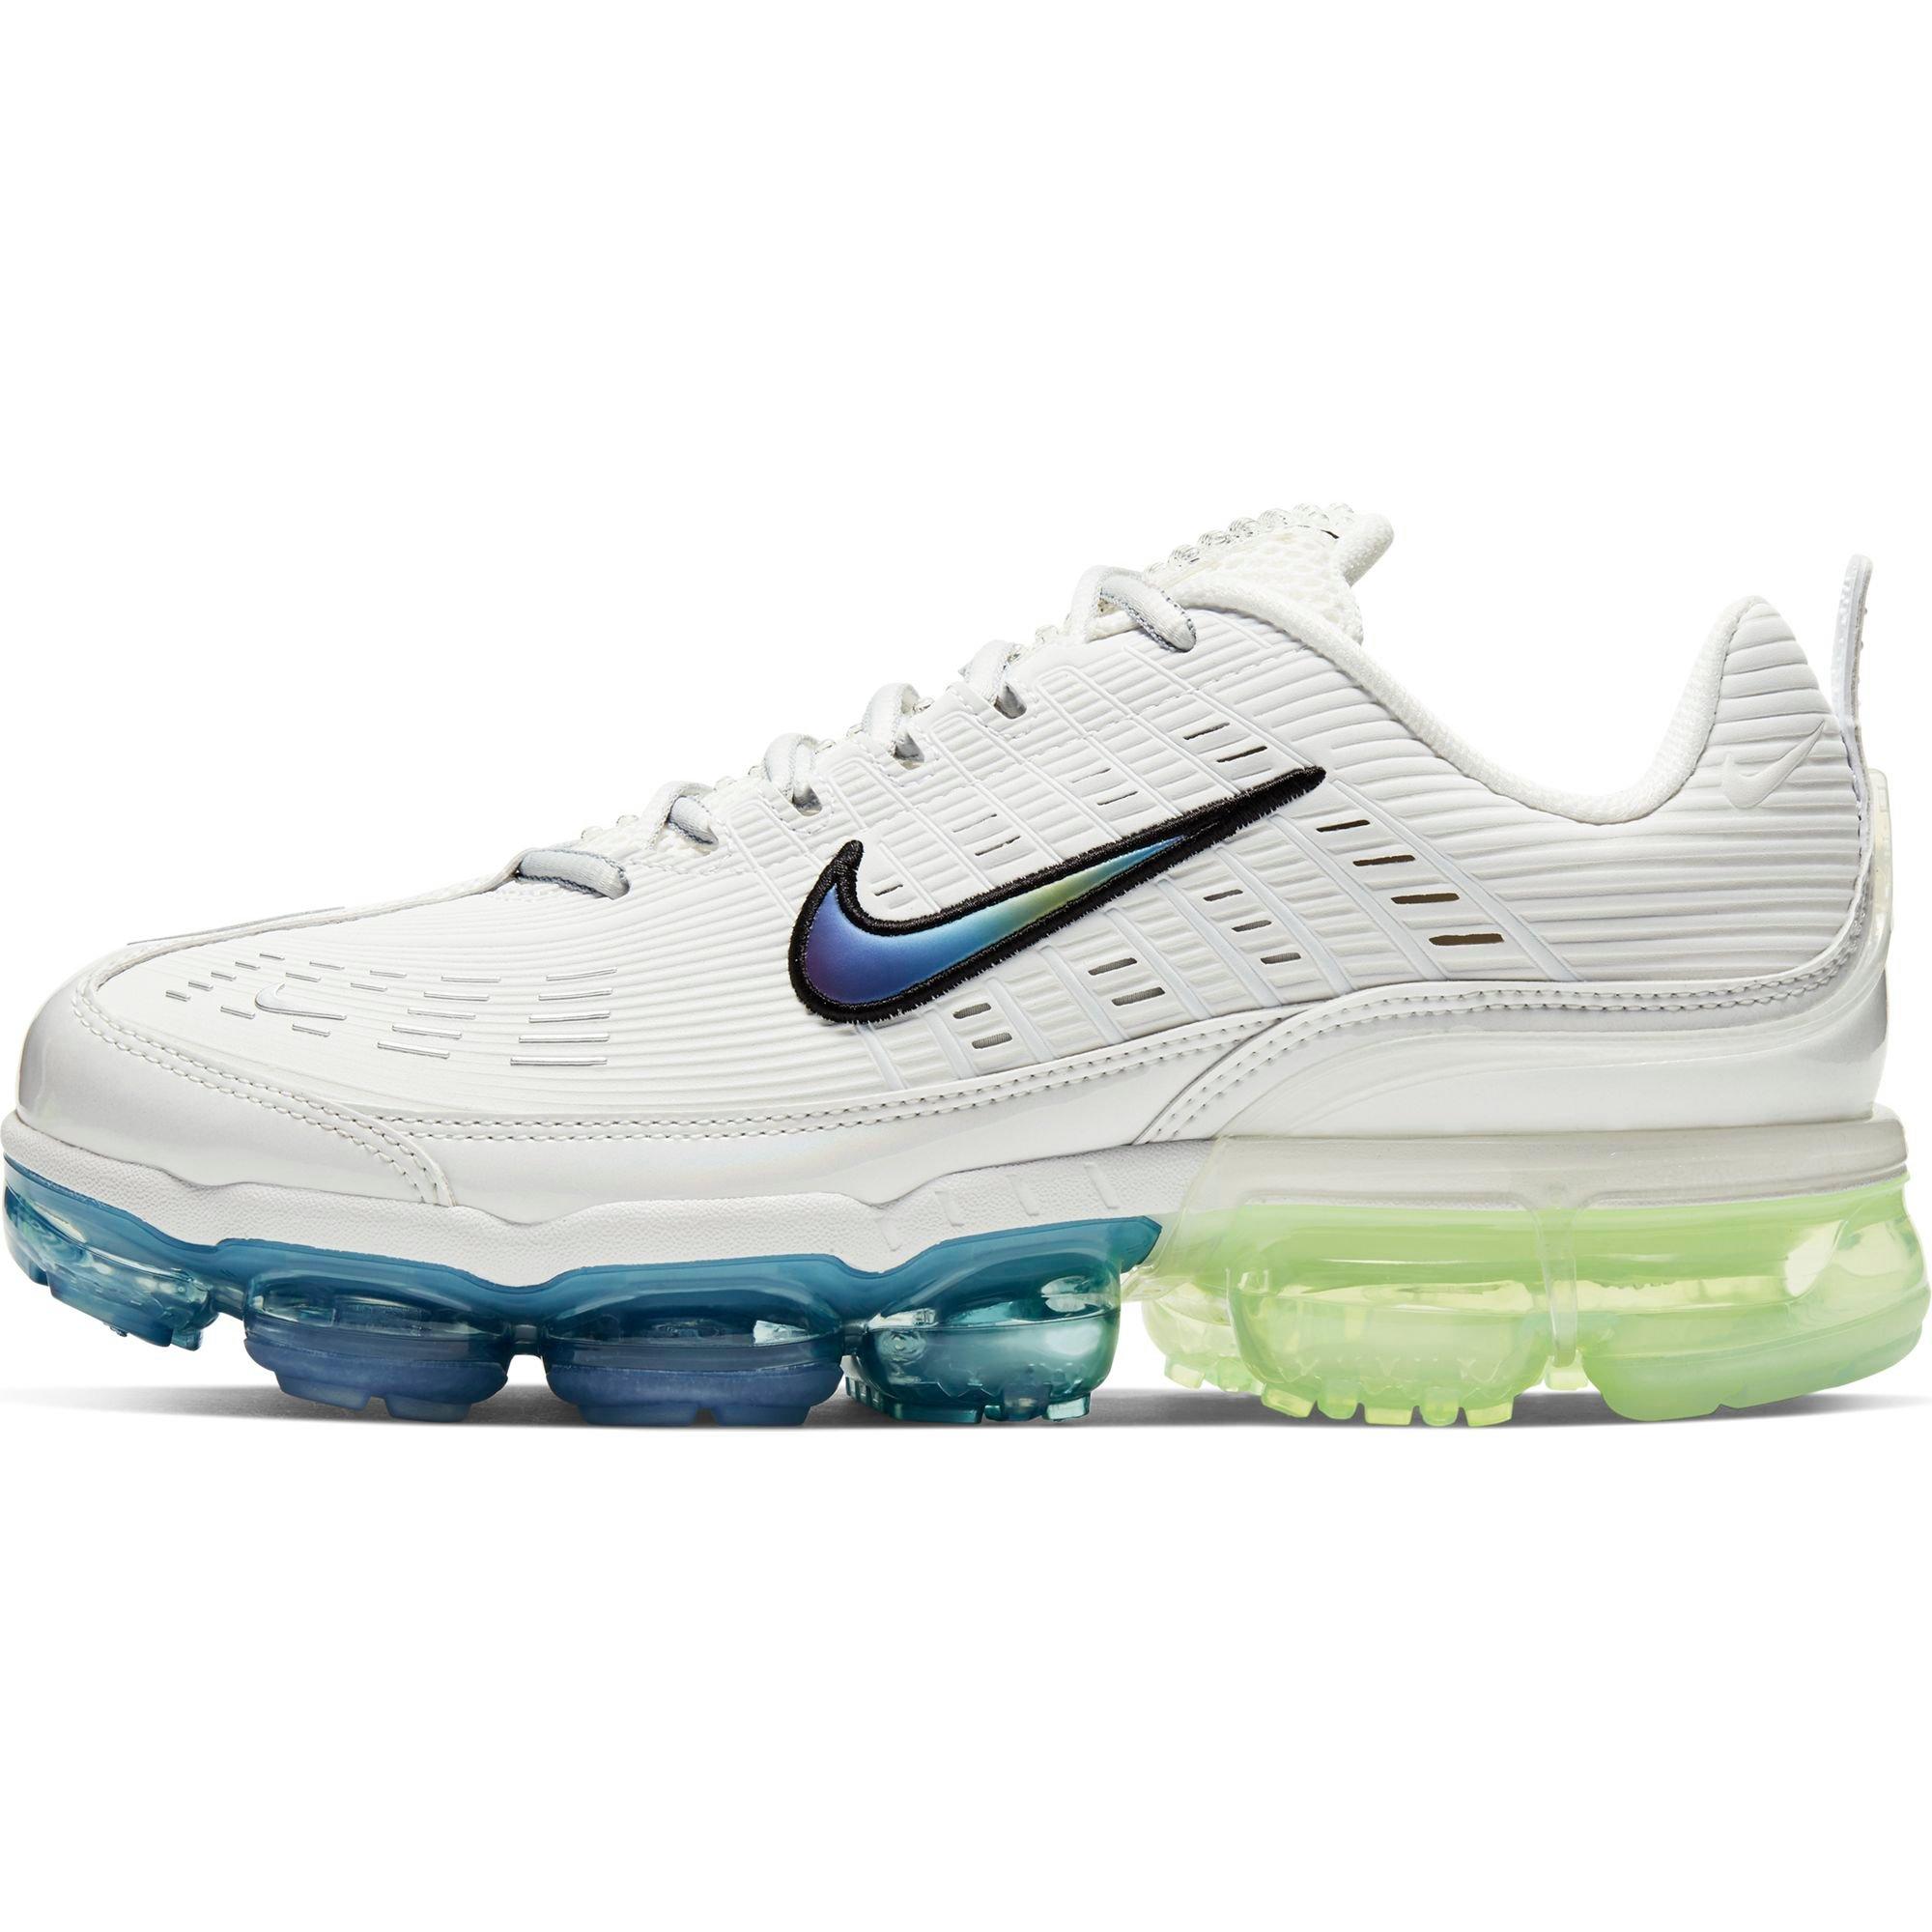 new nike shoes with air bubble